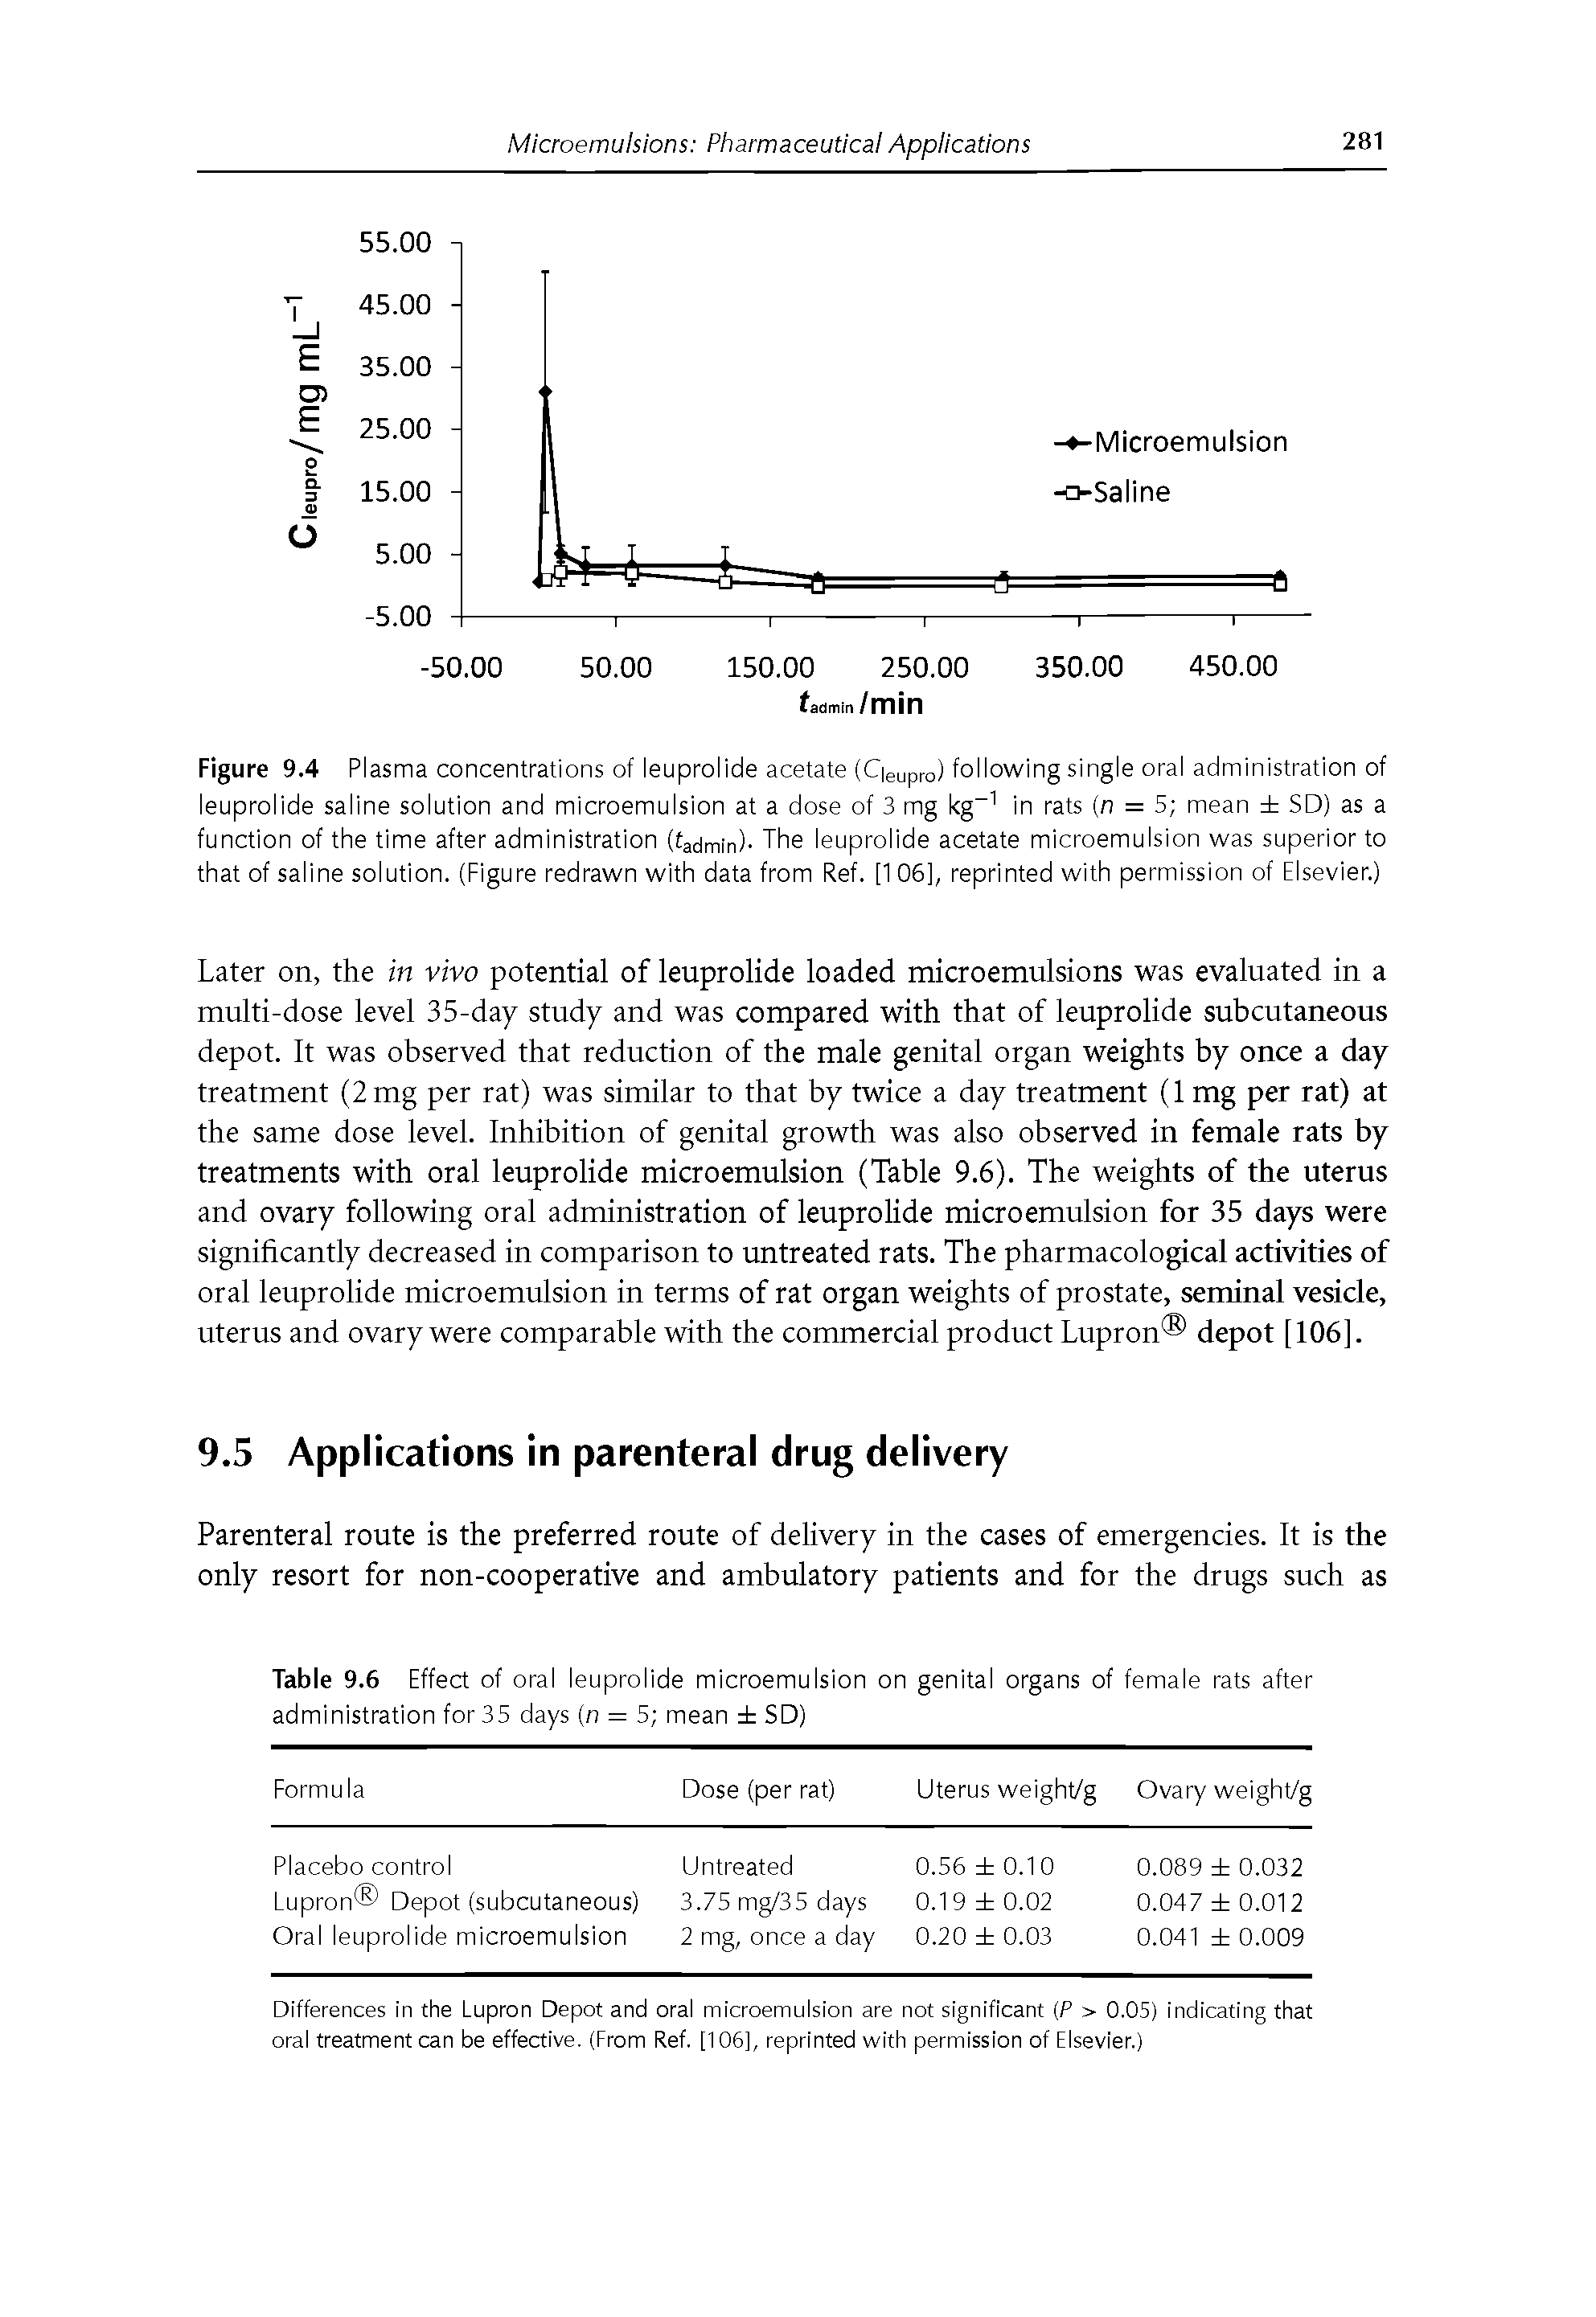 Figure 9.4 Plasma concentrations of leuprolide acetate (C eupro) following single oral administration of leuprolide saline solution and microemulsion at a dose of 3 mg kg-1 in rats (n = 5 mean SD) as a function of the time after administration (tadmm). The leuprolide acetate microemulsion was superior to that of saline solution. (Figure redrawn with data from Ref. [1 06], reprinted with permission of Elsevier.)...